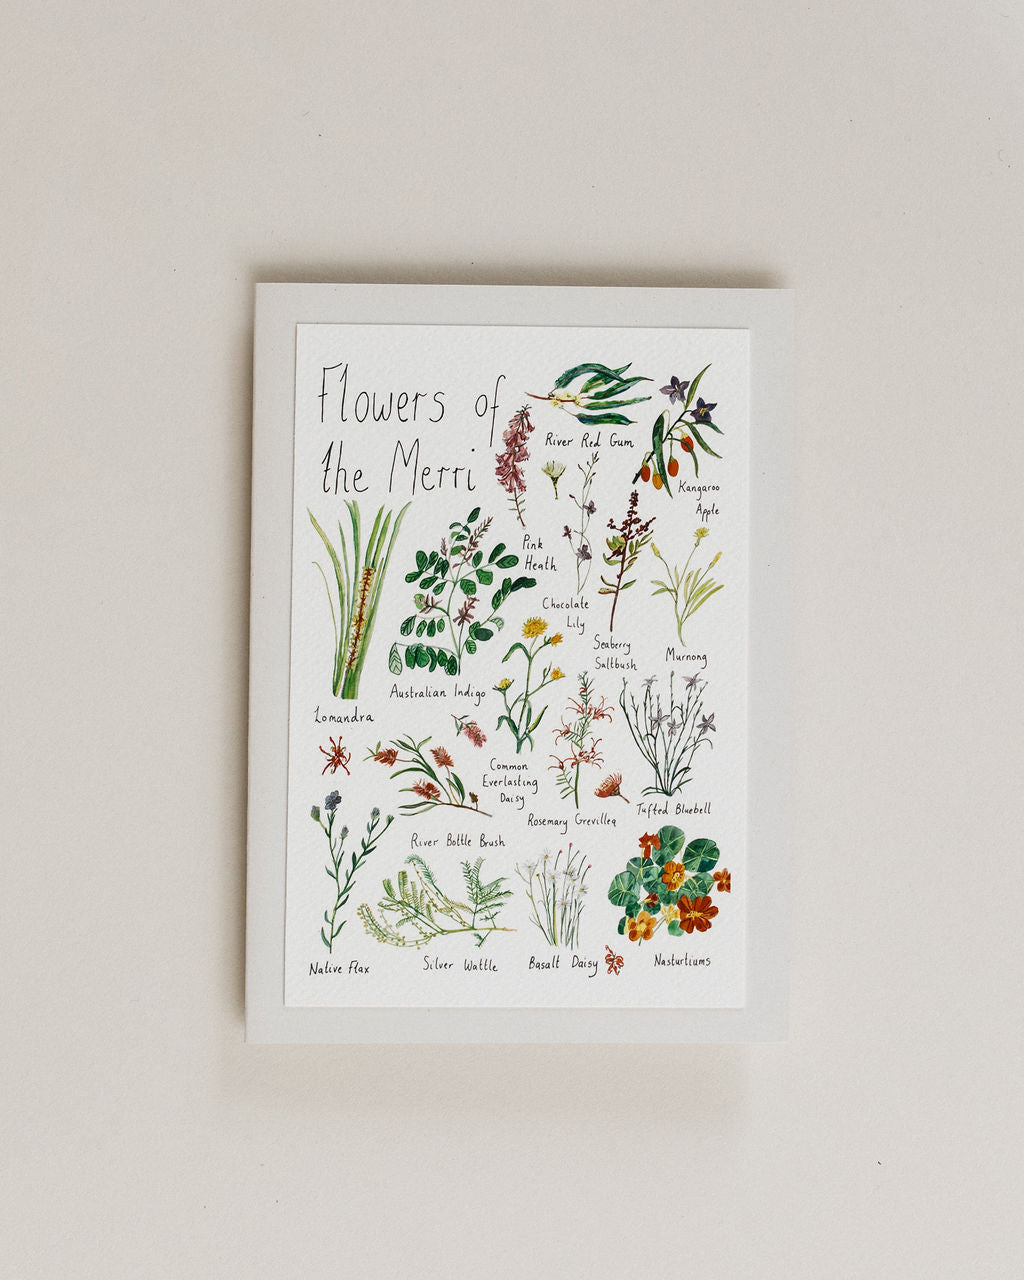 A Greeting Card ~ Flowers of the Merri